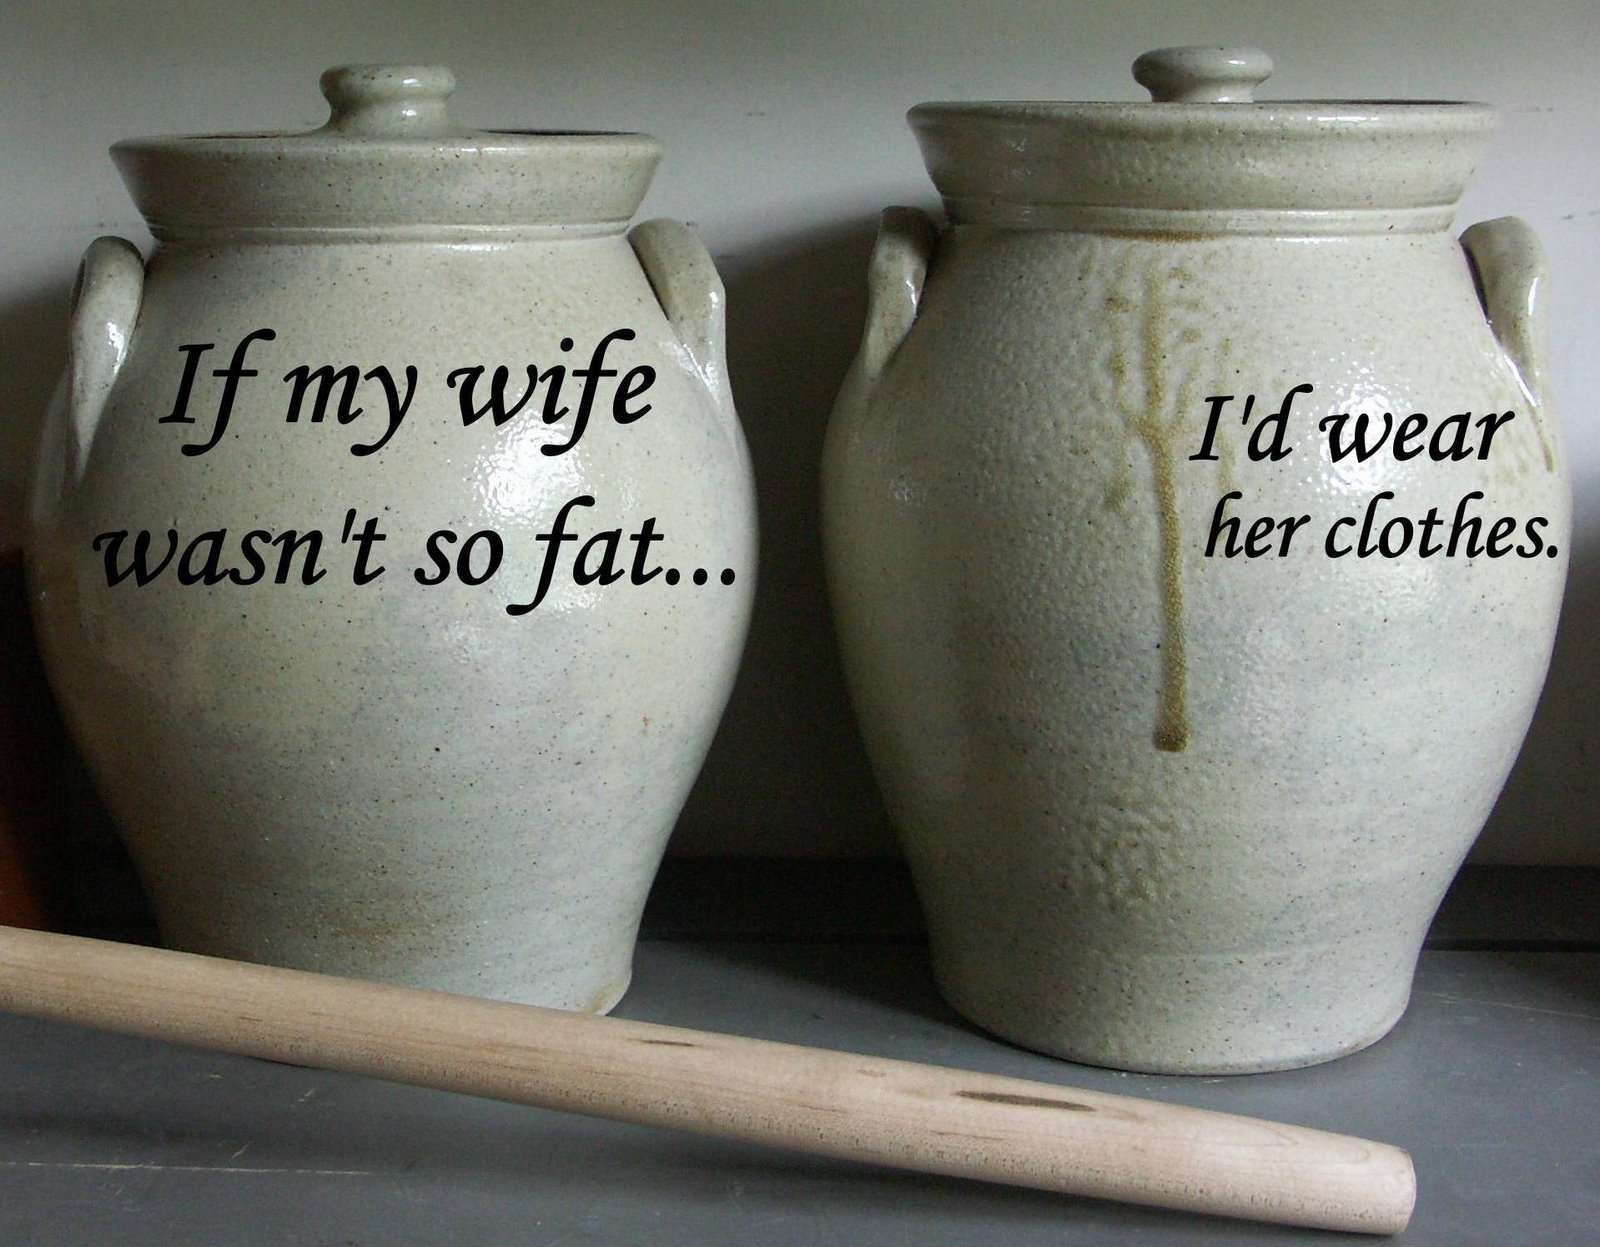 If my wife wasn't so fat, I'd wear her clothes.